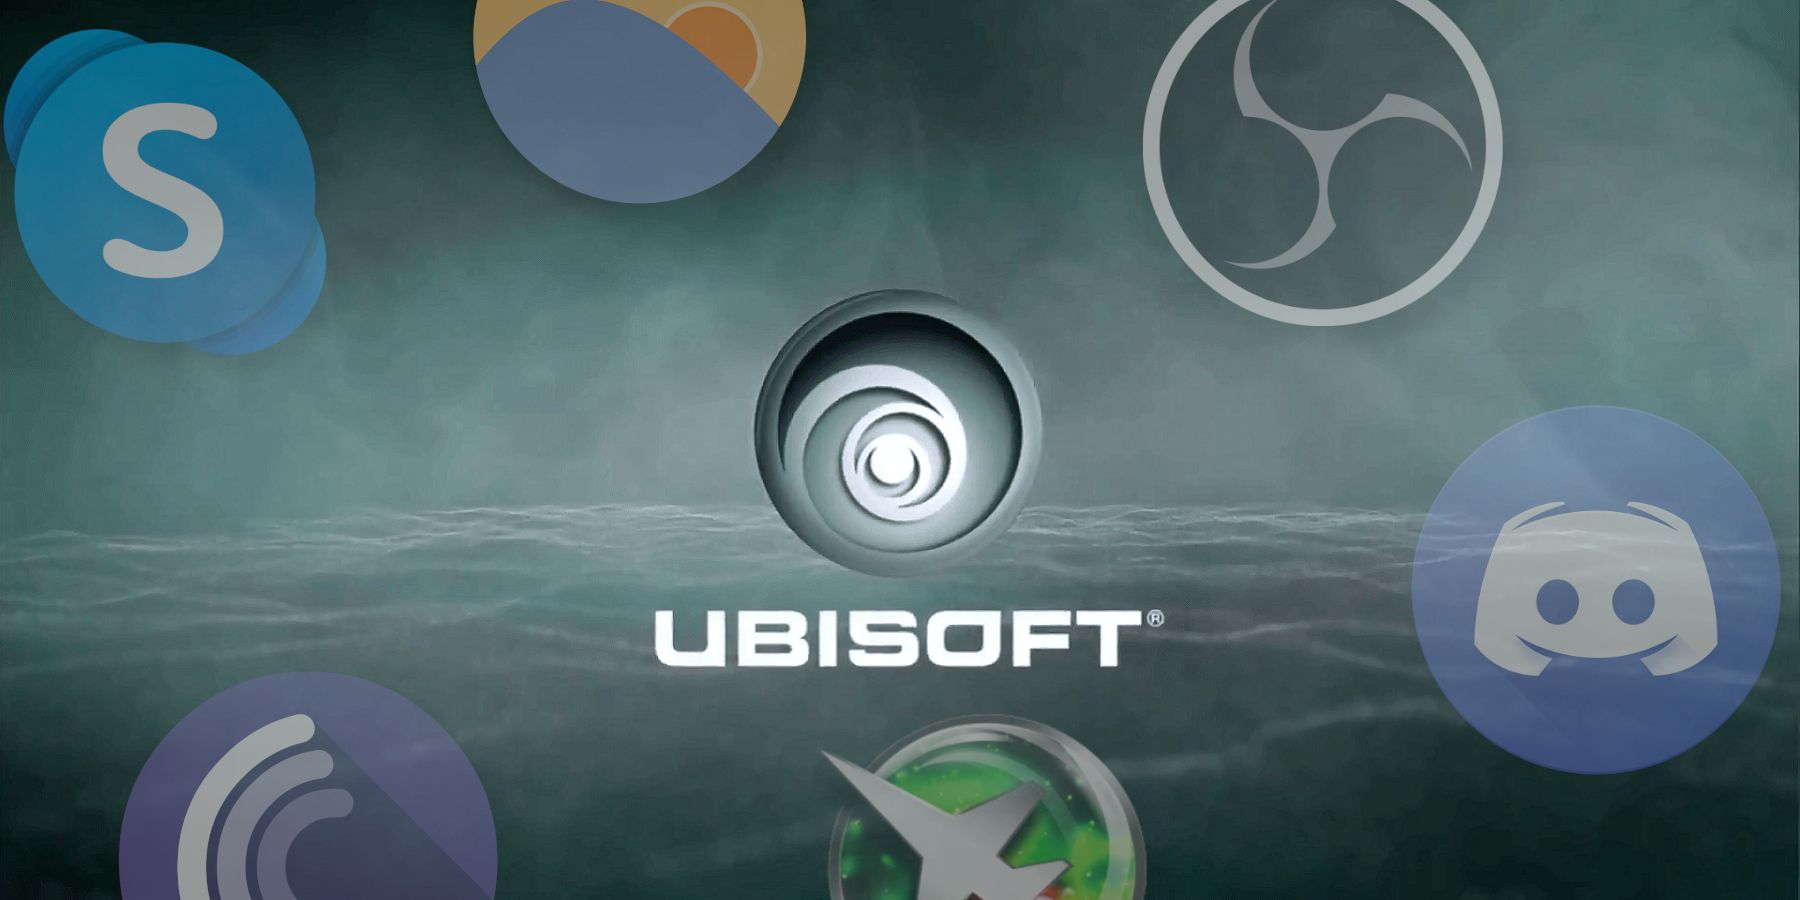 The Ubisoft logo on a smoky background with the logos of third party software floating around.